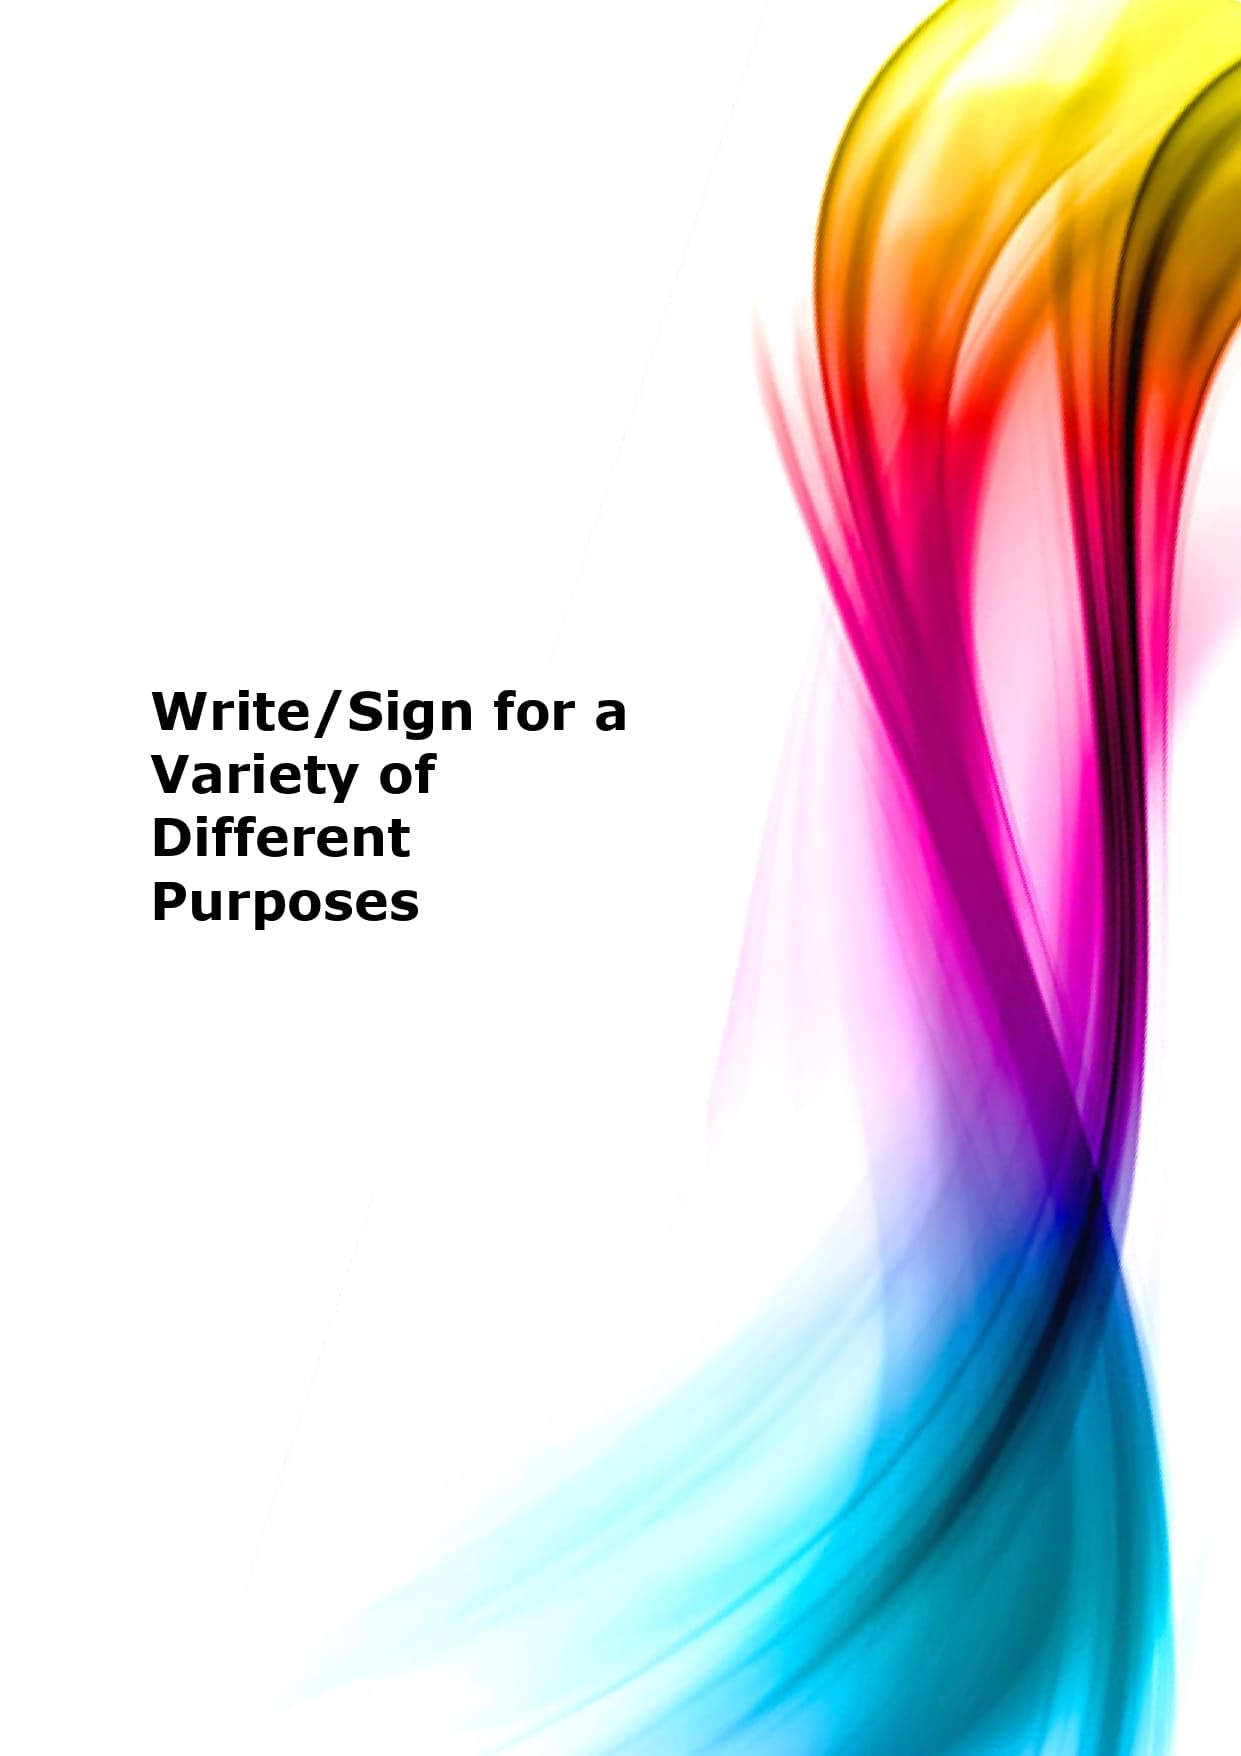 Write/Sign for a variety of different purposes